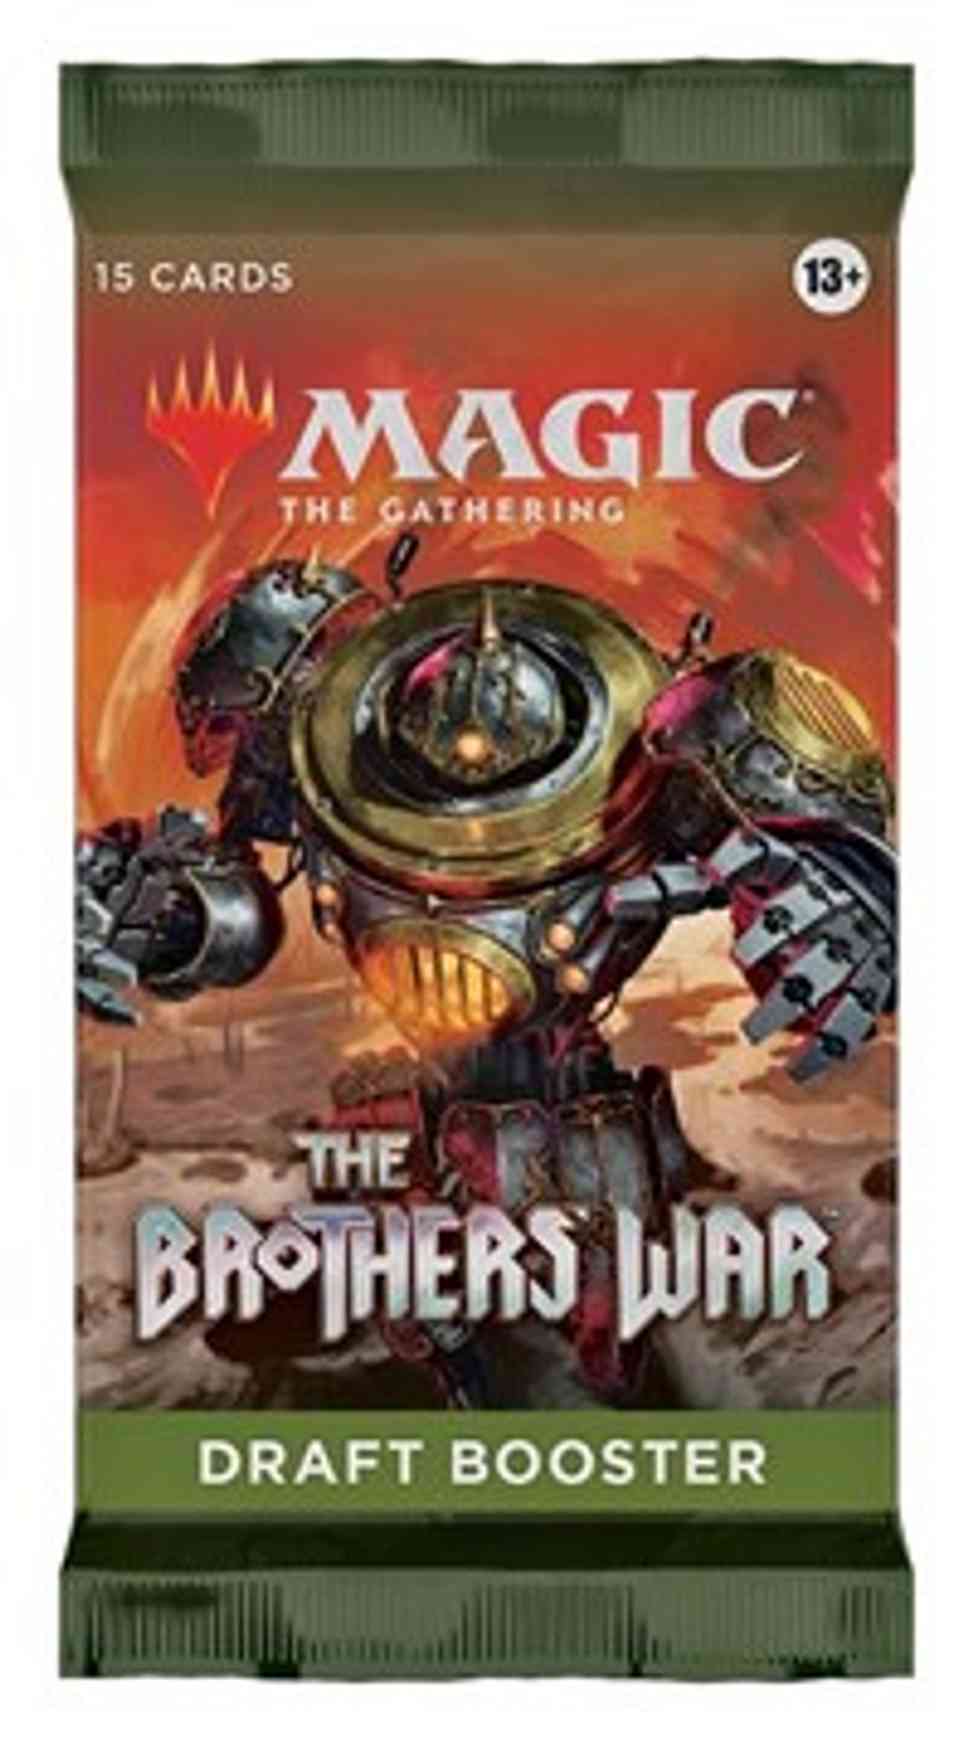 The Brothers' War - Draft Booster Pack magic card front